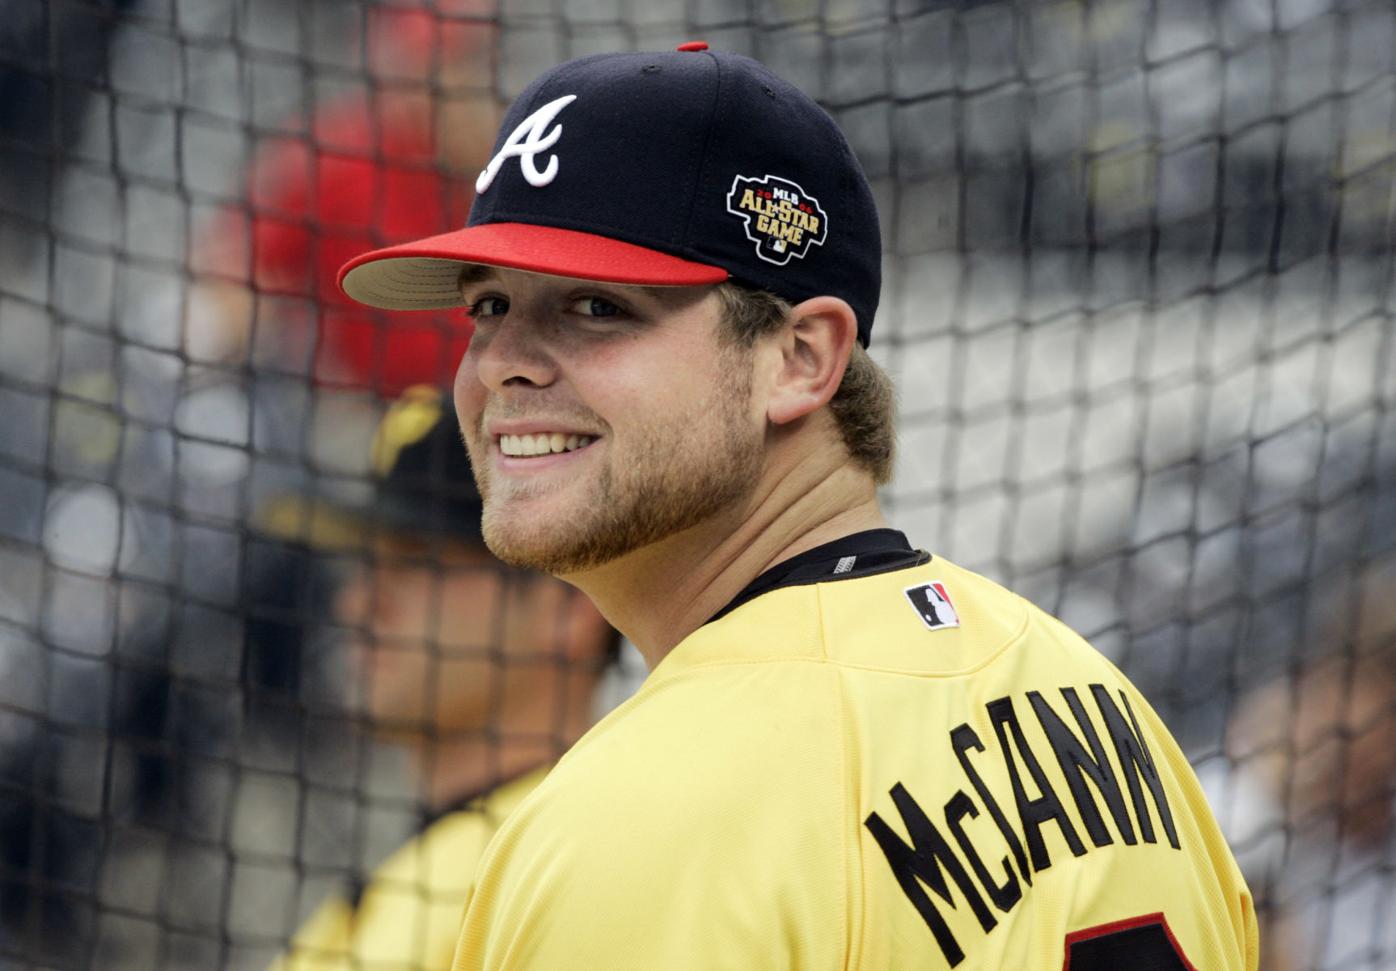 Atlanta Braves - Brian McCann celebrates in the dugout after his